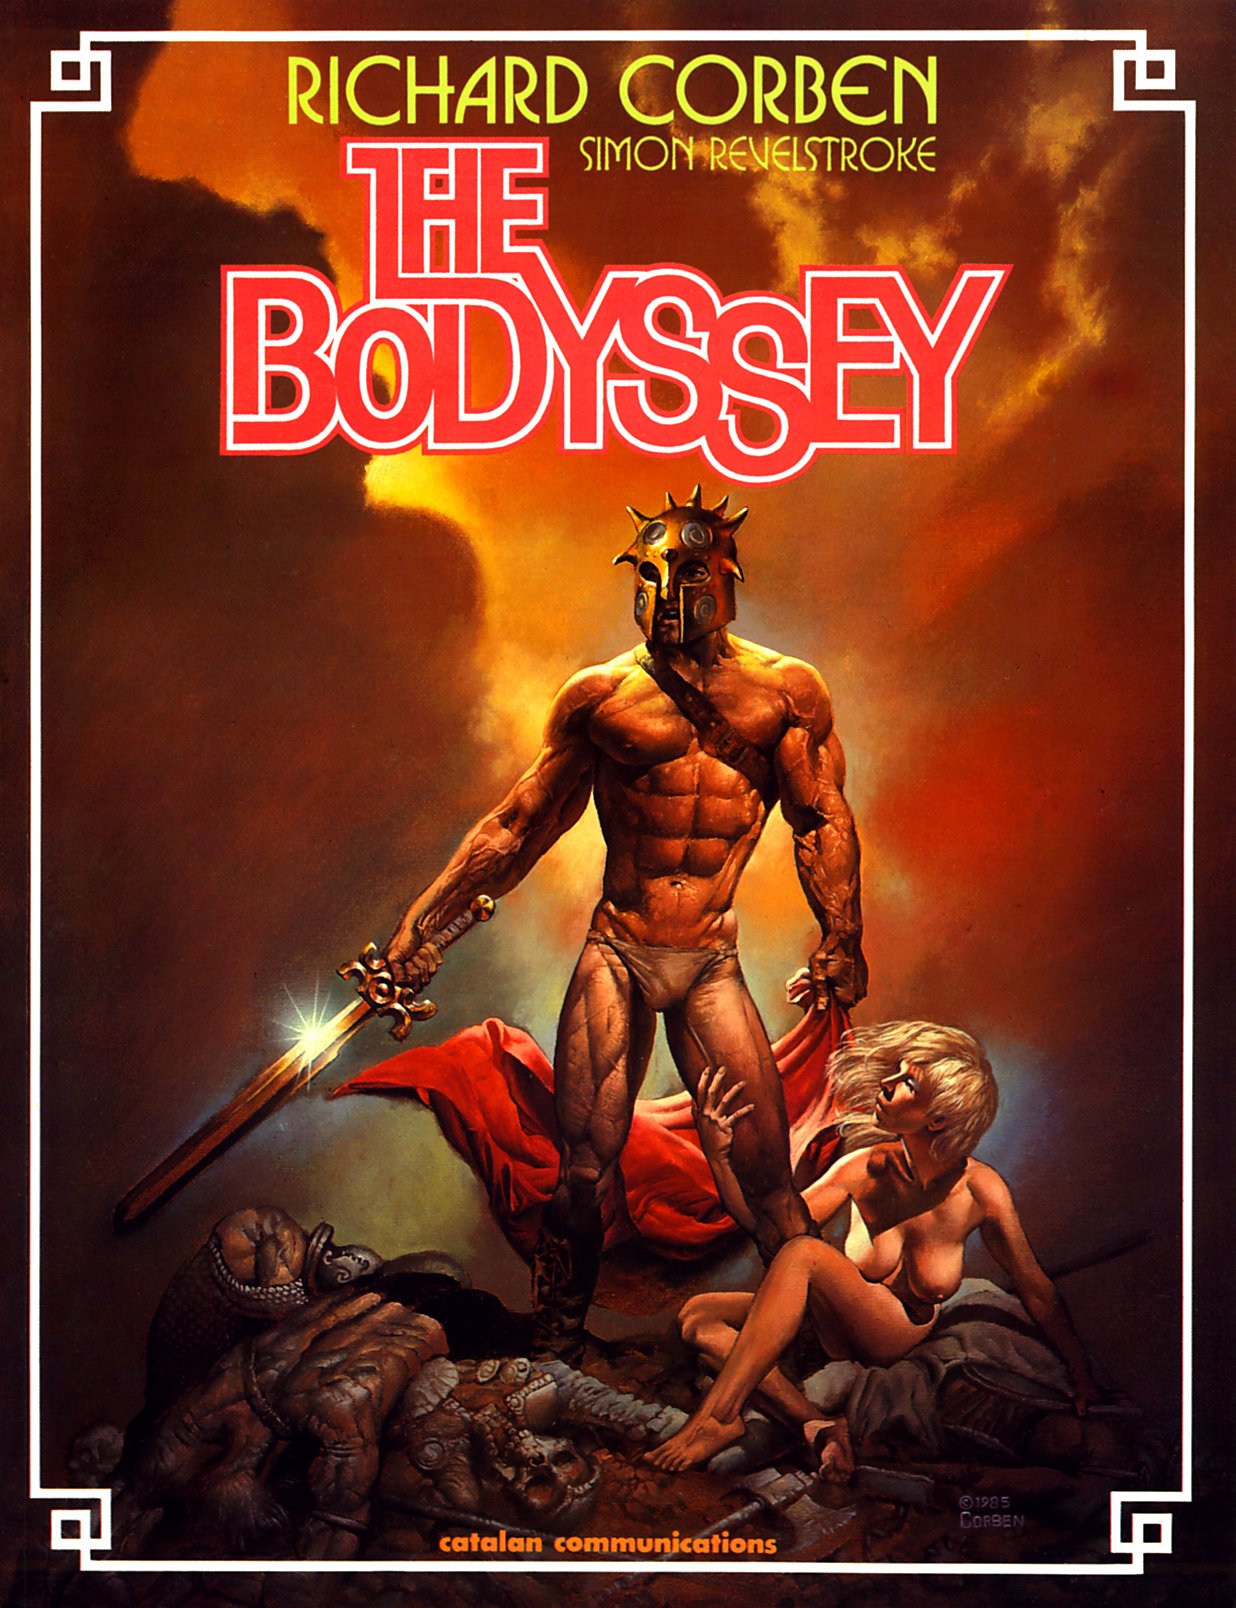 Read online The Bodyssey comic -  Issue # Full - 1